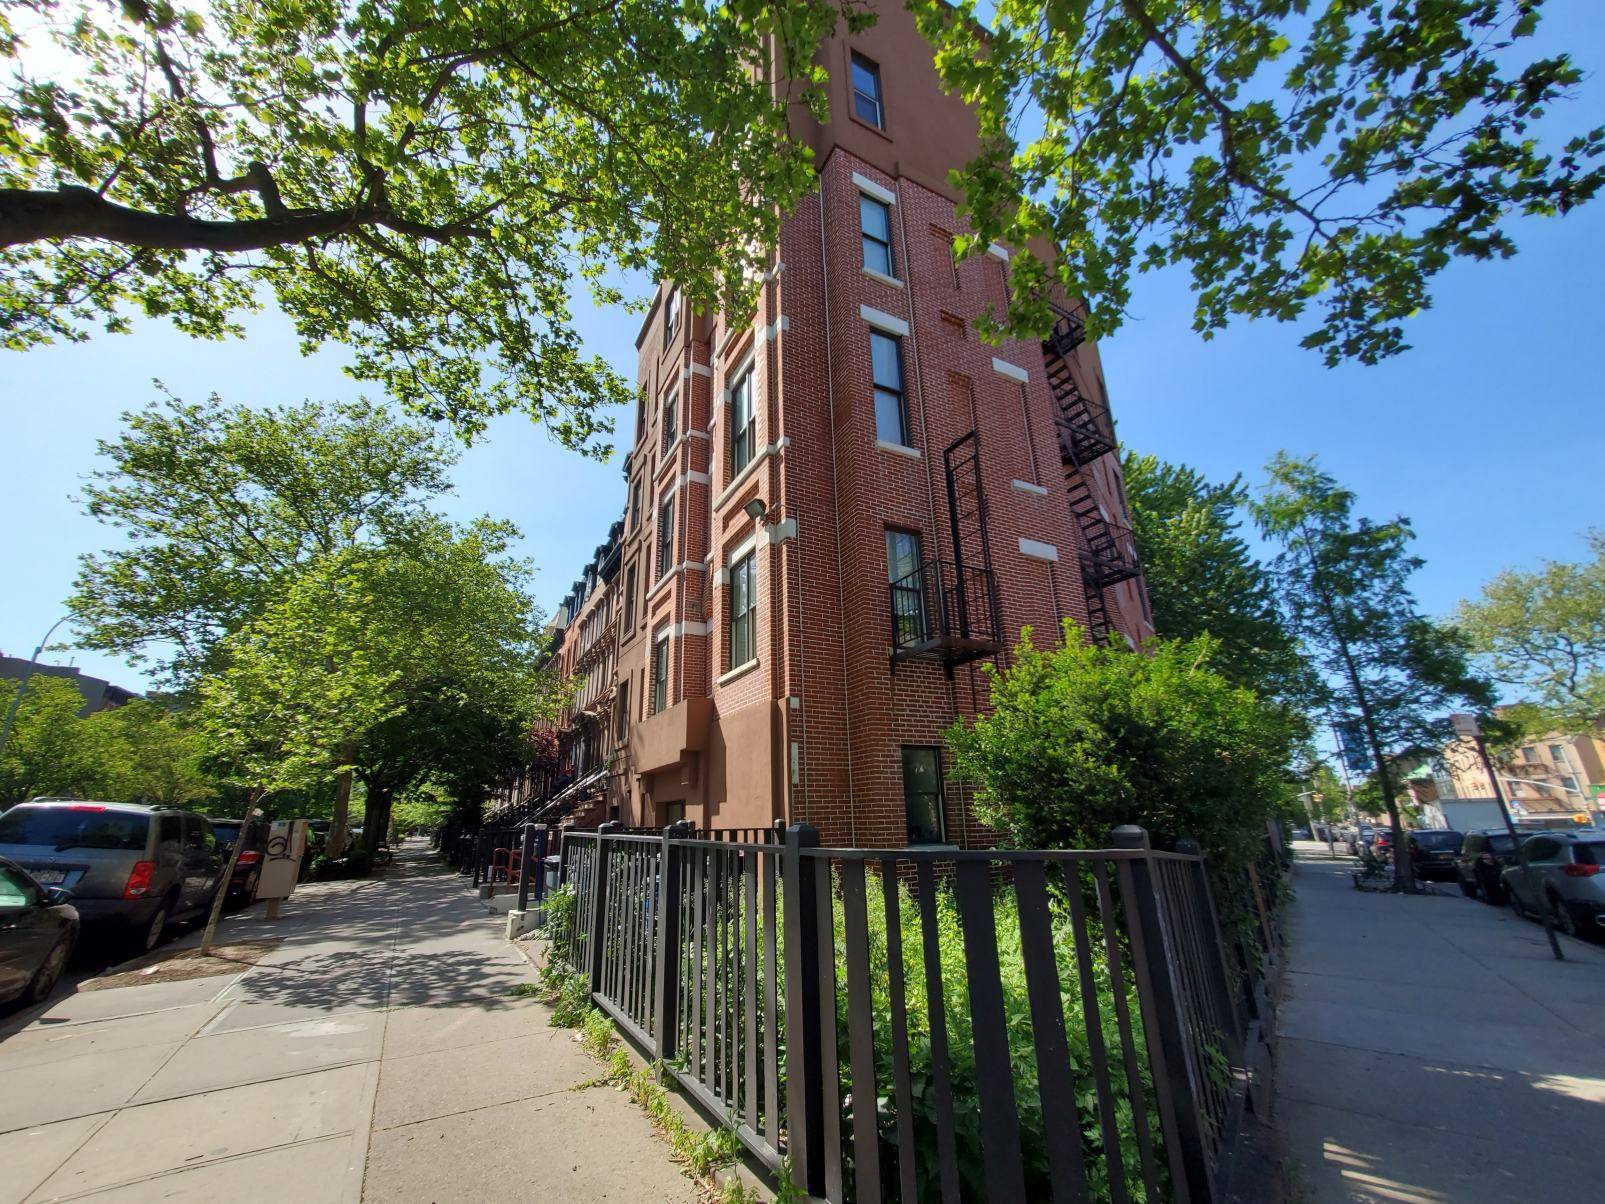 VIRTUAL TOUR AVAILABLE UPON REQUEST Enjoy this Modern Design 4 Bedroom 2 Bath in the heart of beautiful Clinton Hill, BK Kitchen modern design with granite counters Stainless steel appliances ...